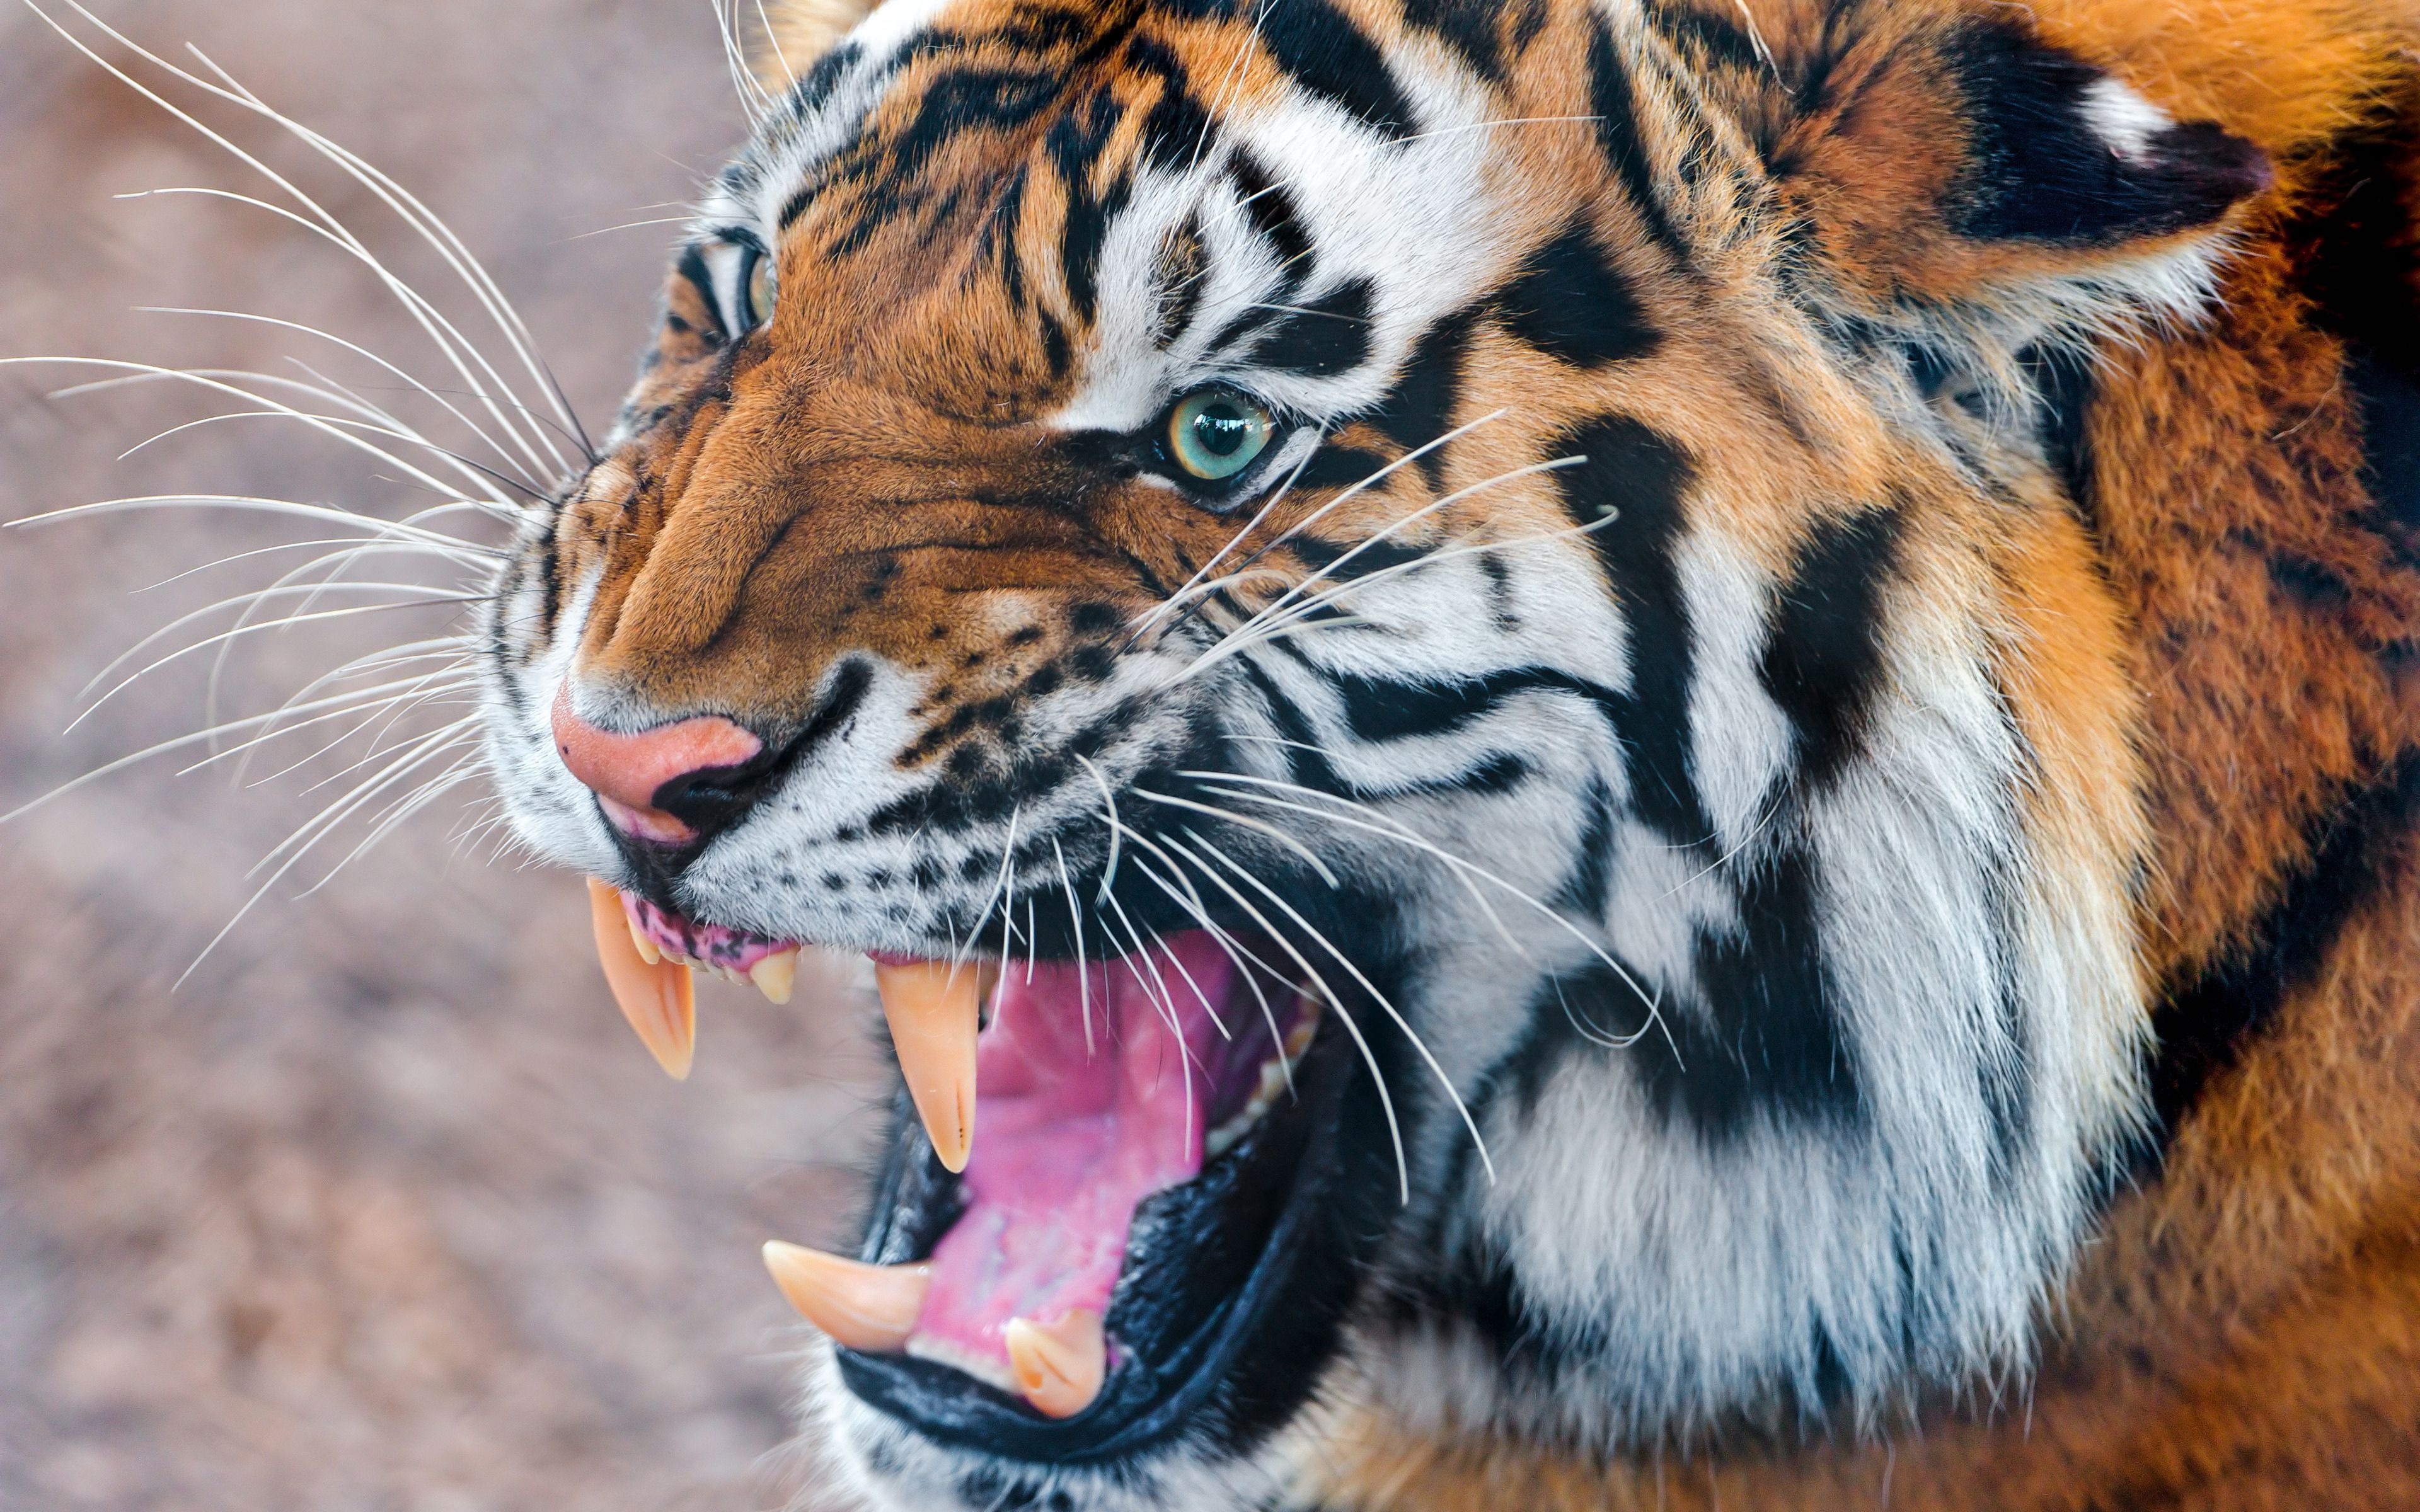 grin, tiger, animals, aggression, muzzle, anger mobile wallpaper